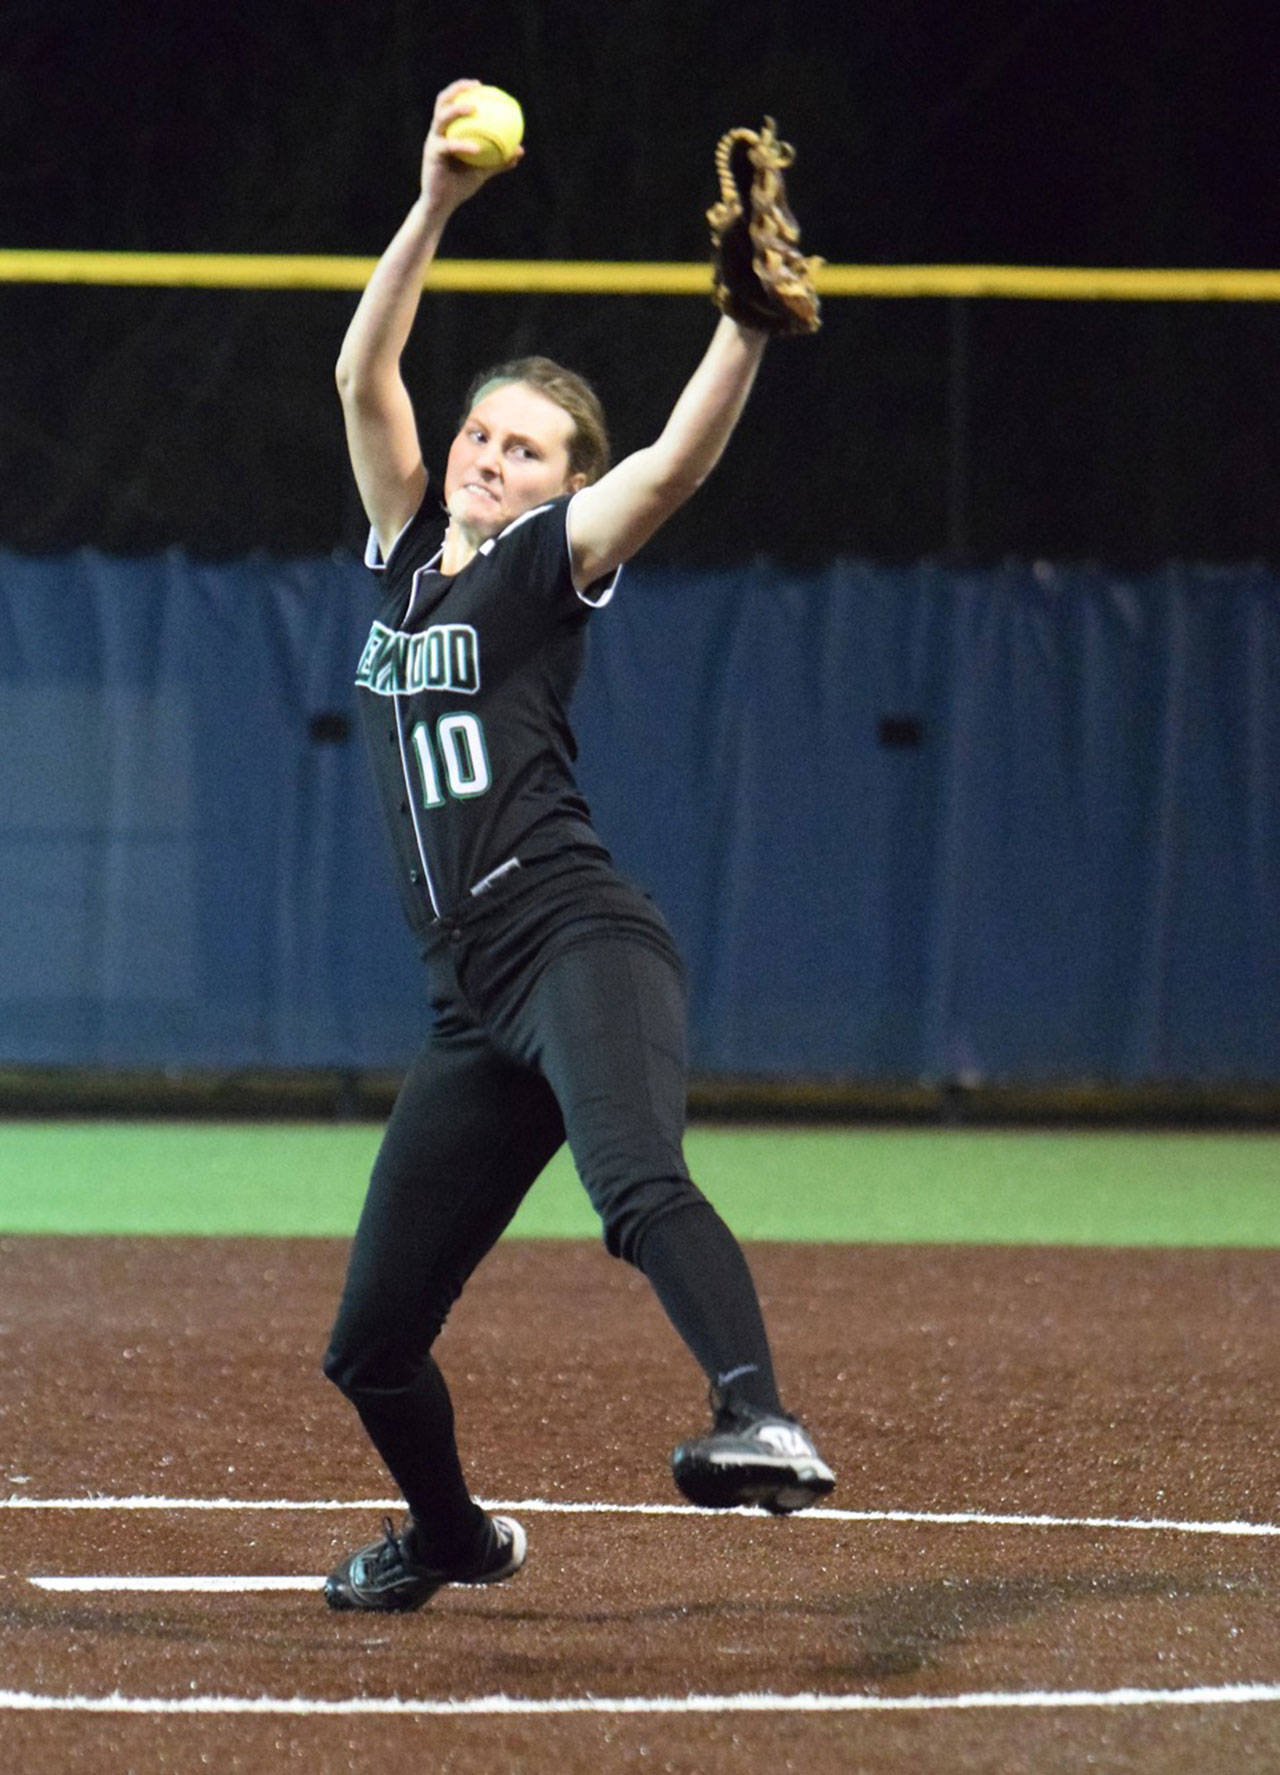 Kentwood’s Taylor Lott launches a pitch during Wednesday’s game. RACHEL CIAMPI, Auburn Reporter